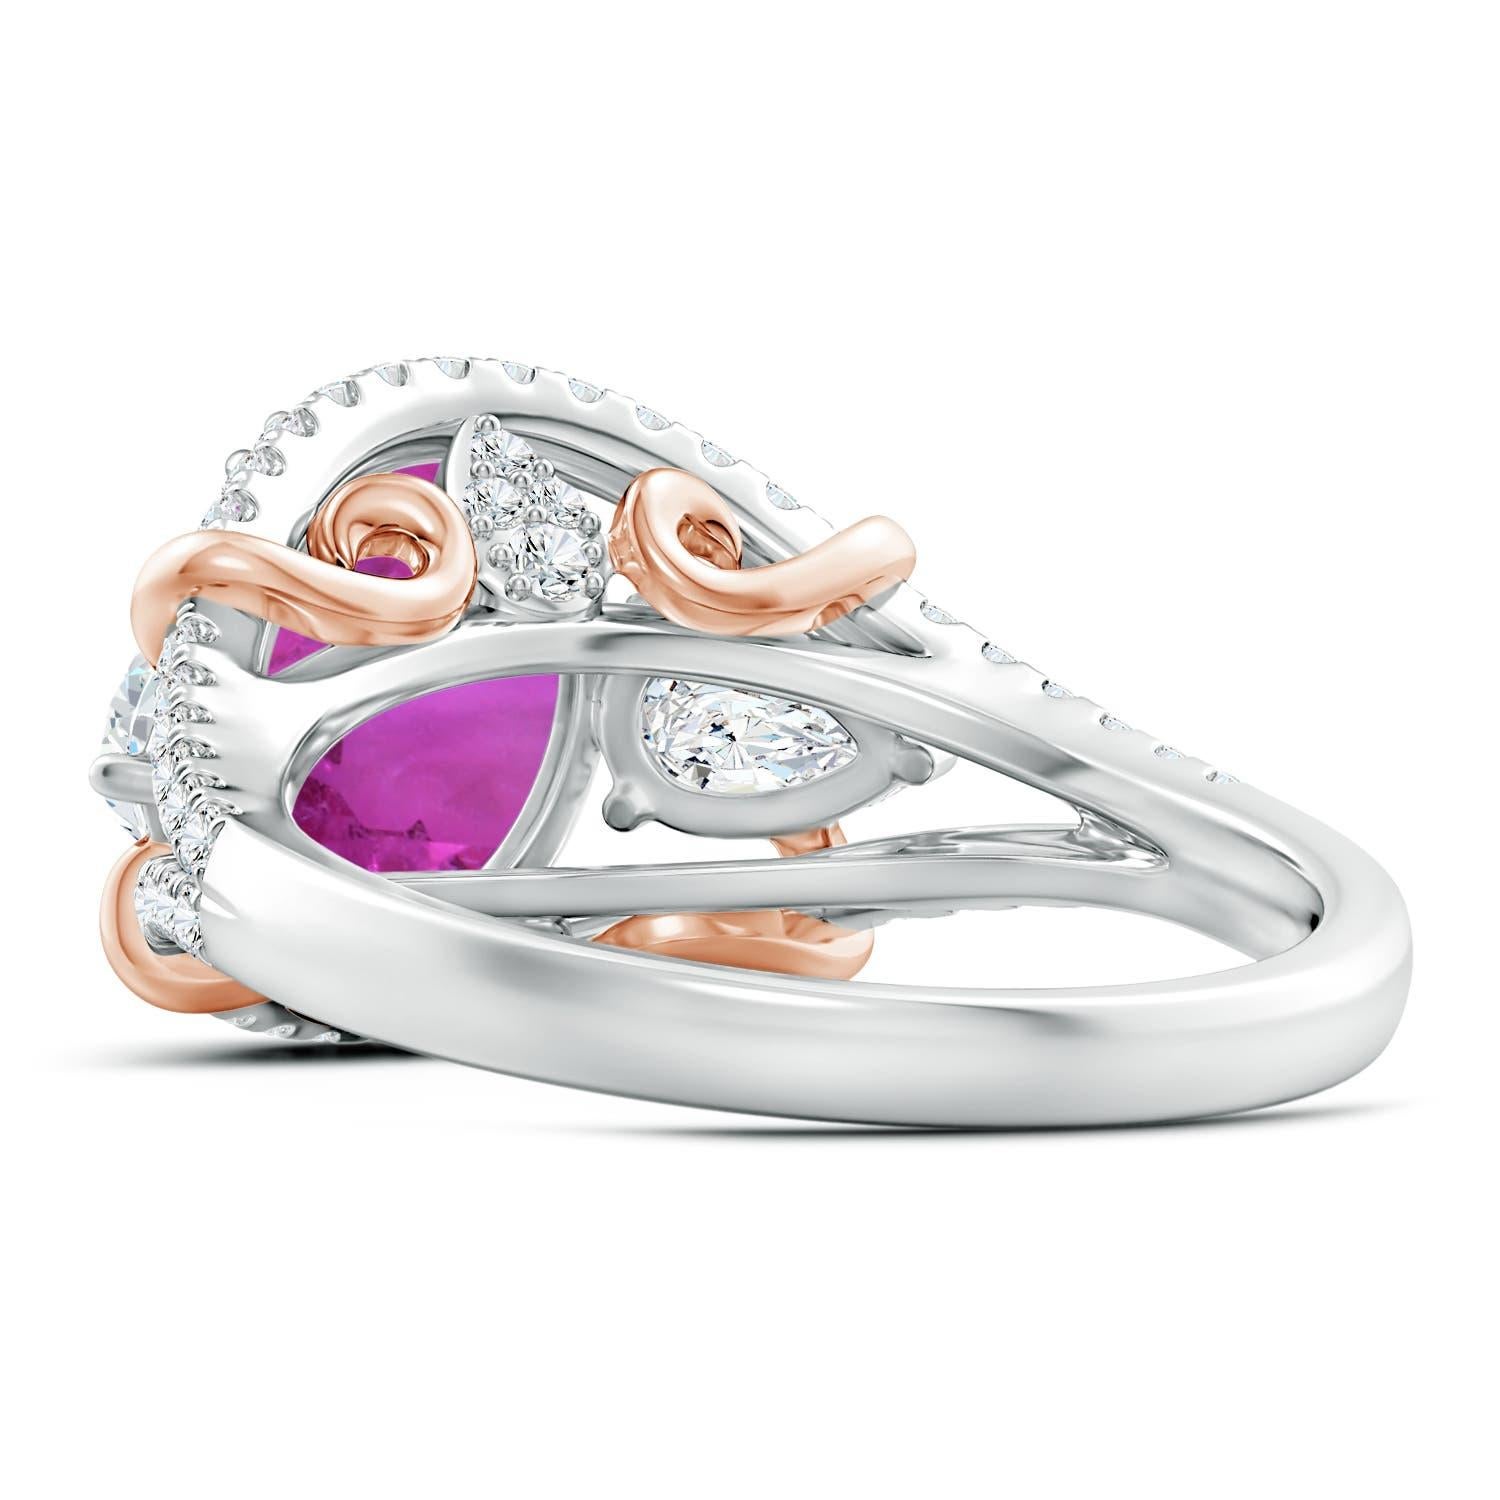 For Sale:  Angara GIA Certified Natural Pink Sapphire Ring in Rose Gold with Diamonds 4